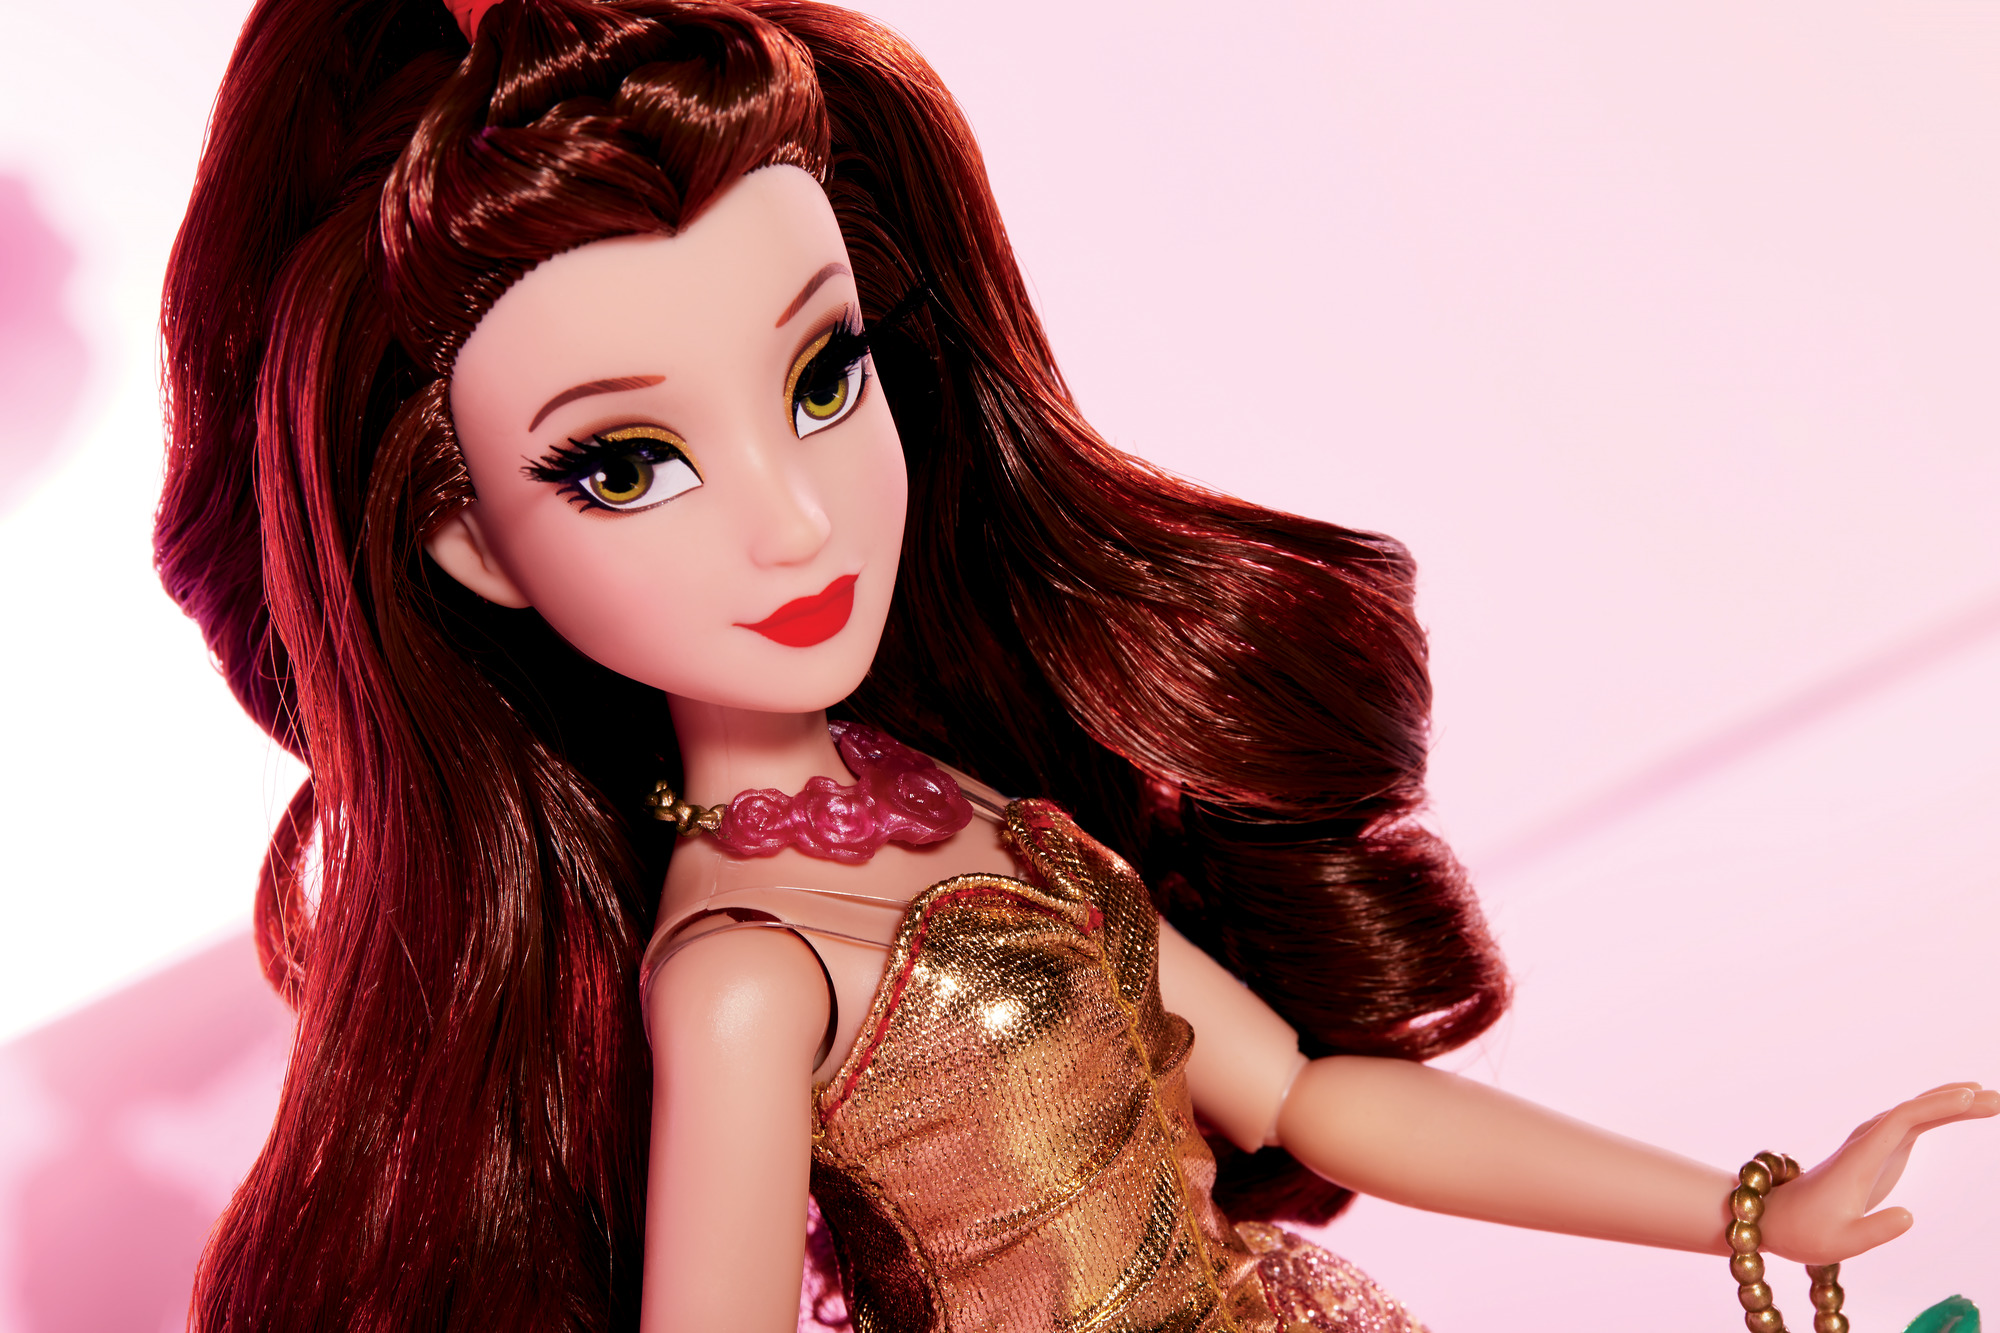 Disney Princess Style Series, Belle Fashion Doll In Contemporary Style - image 7 of 9